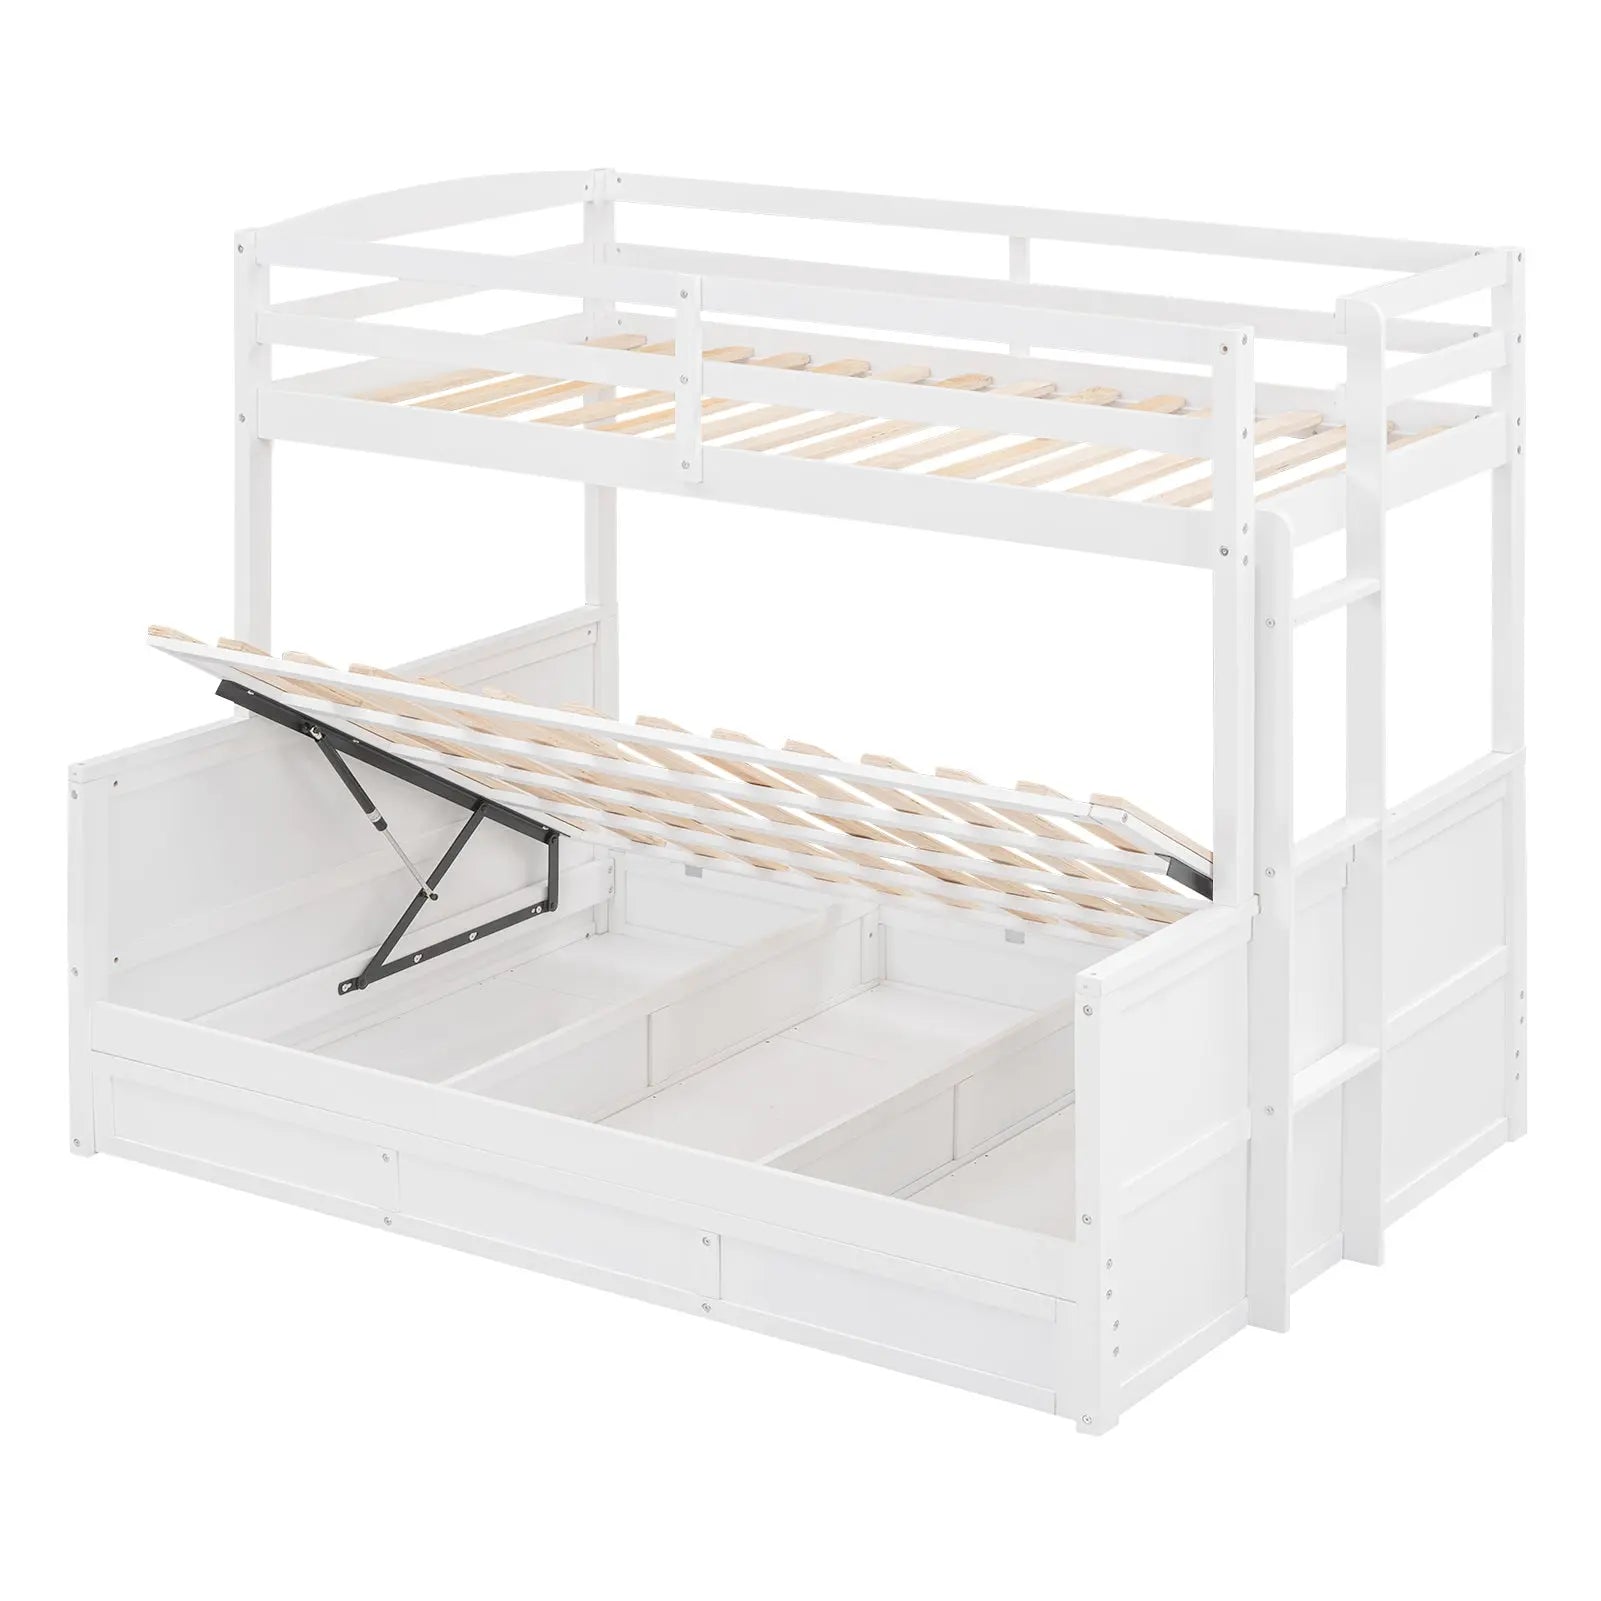 Bellemave Twin over Full Wood Bunk Bed with Hydraulic Lift Up Storage Bellemave